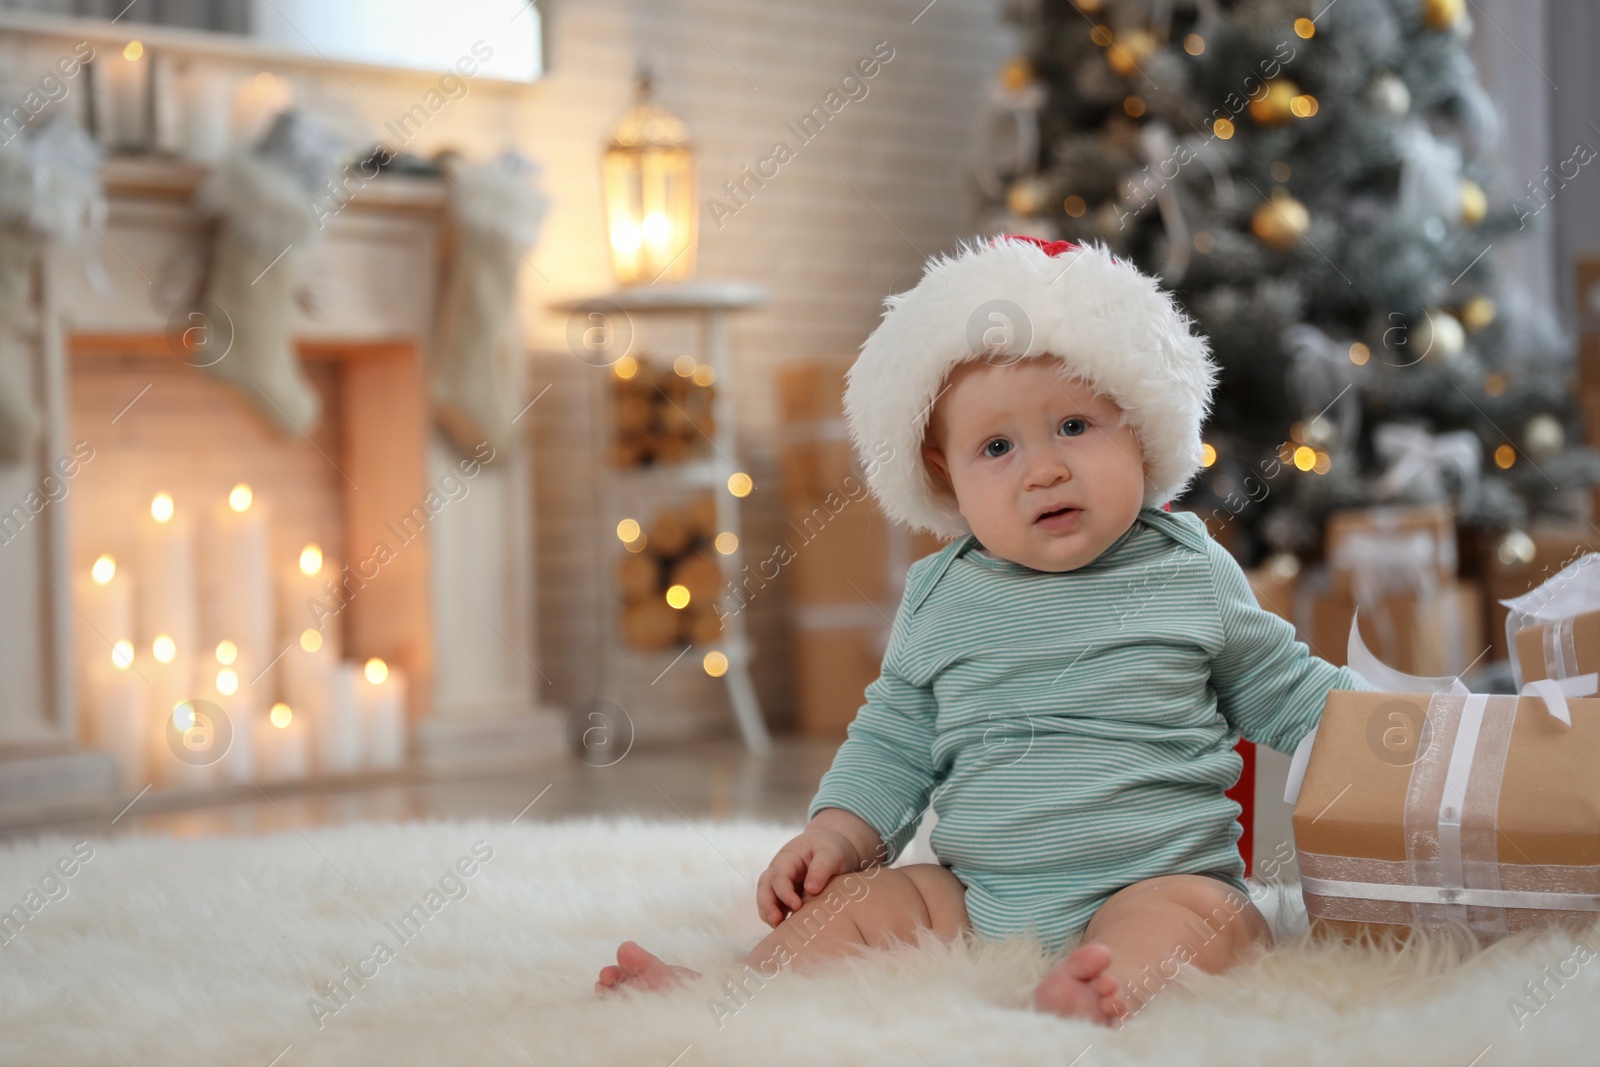 Image of Cute baby wearing Santa hat in room with Christmas tree